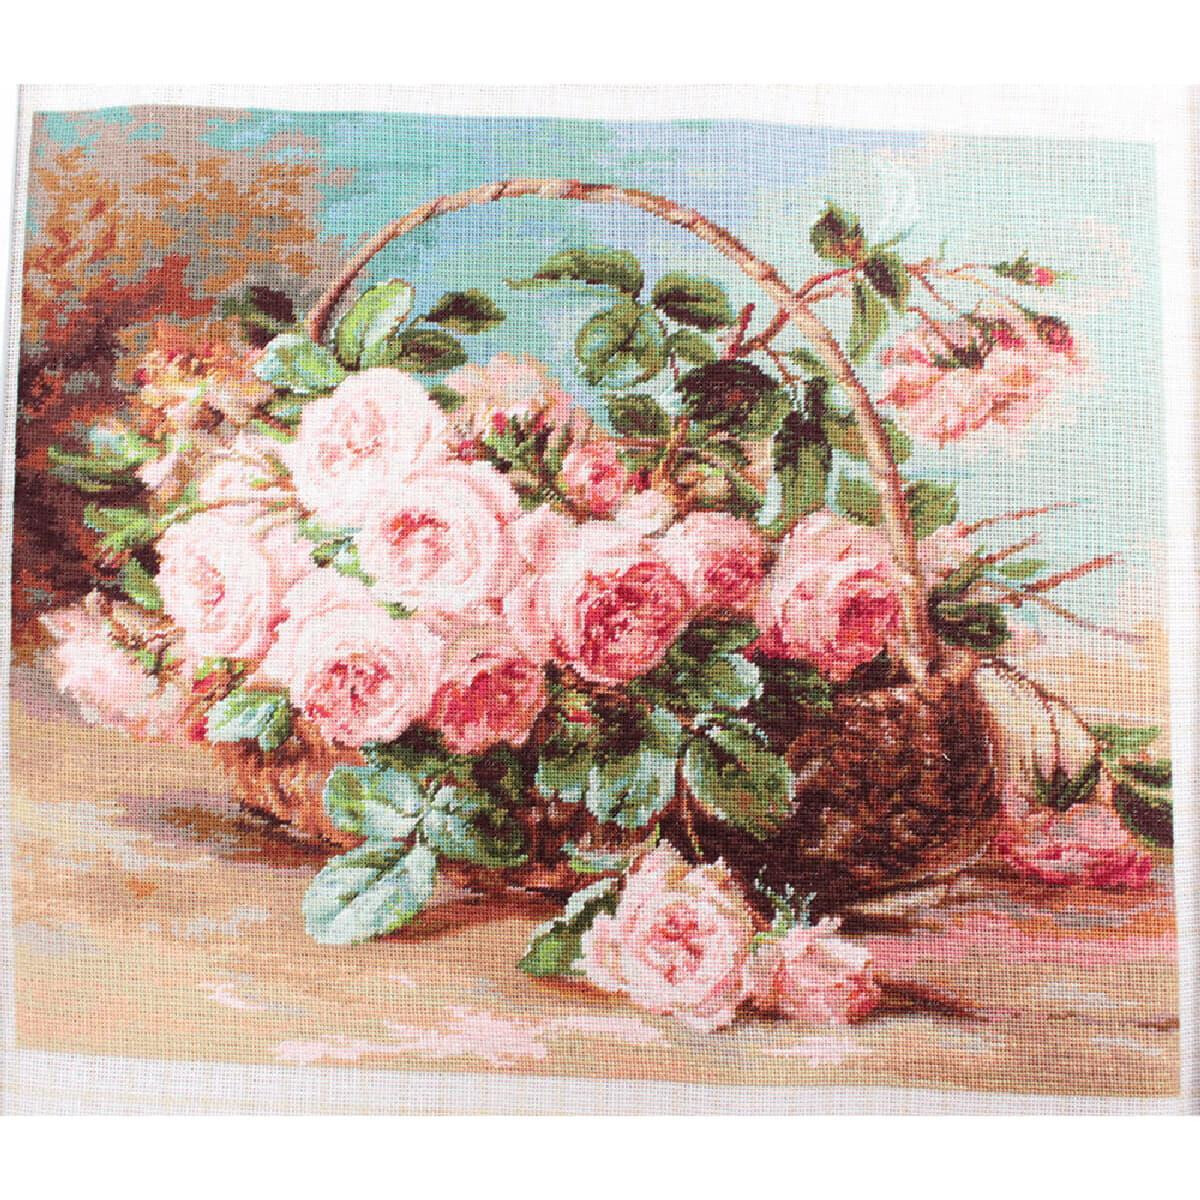 The picture shows a woven basket with a lush bouquet of...